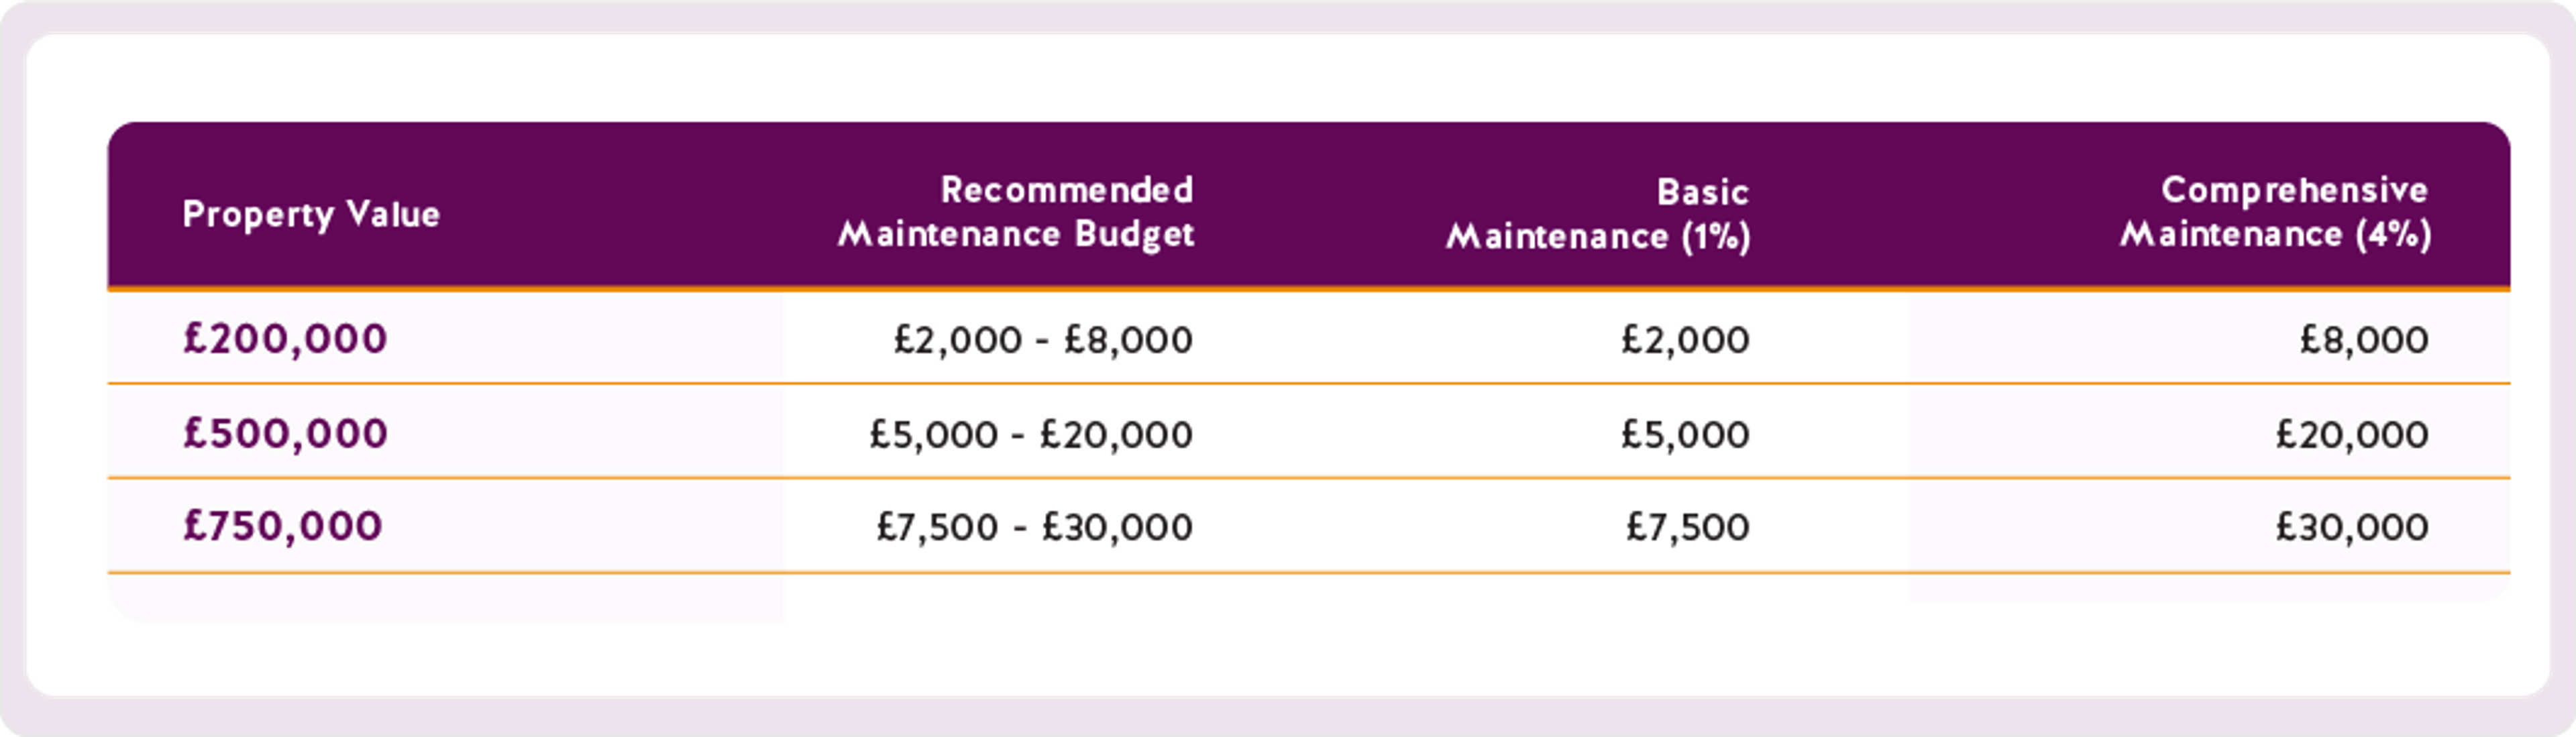 A table showing recommended maintenance budget by property value